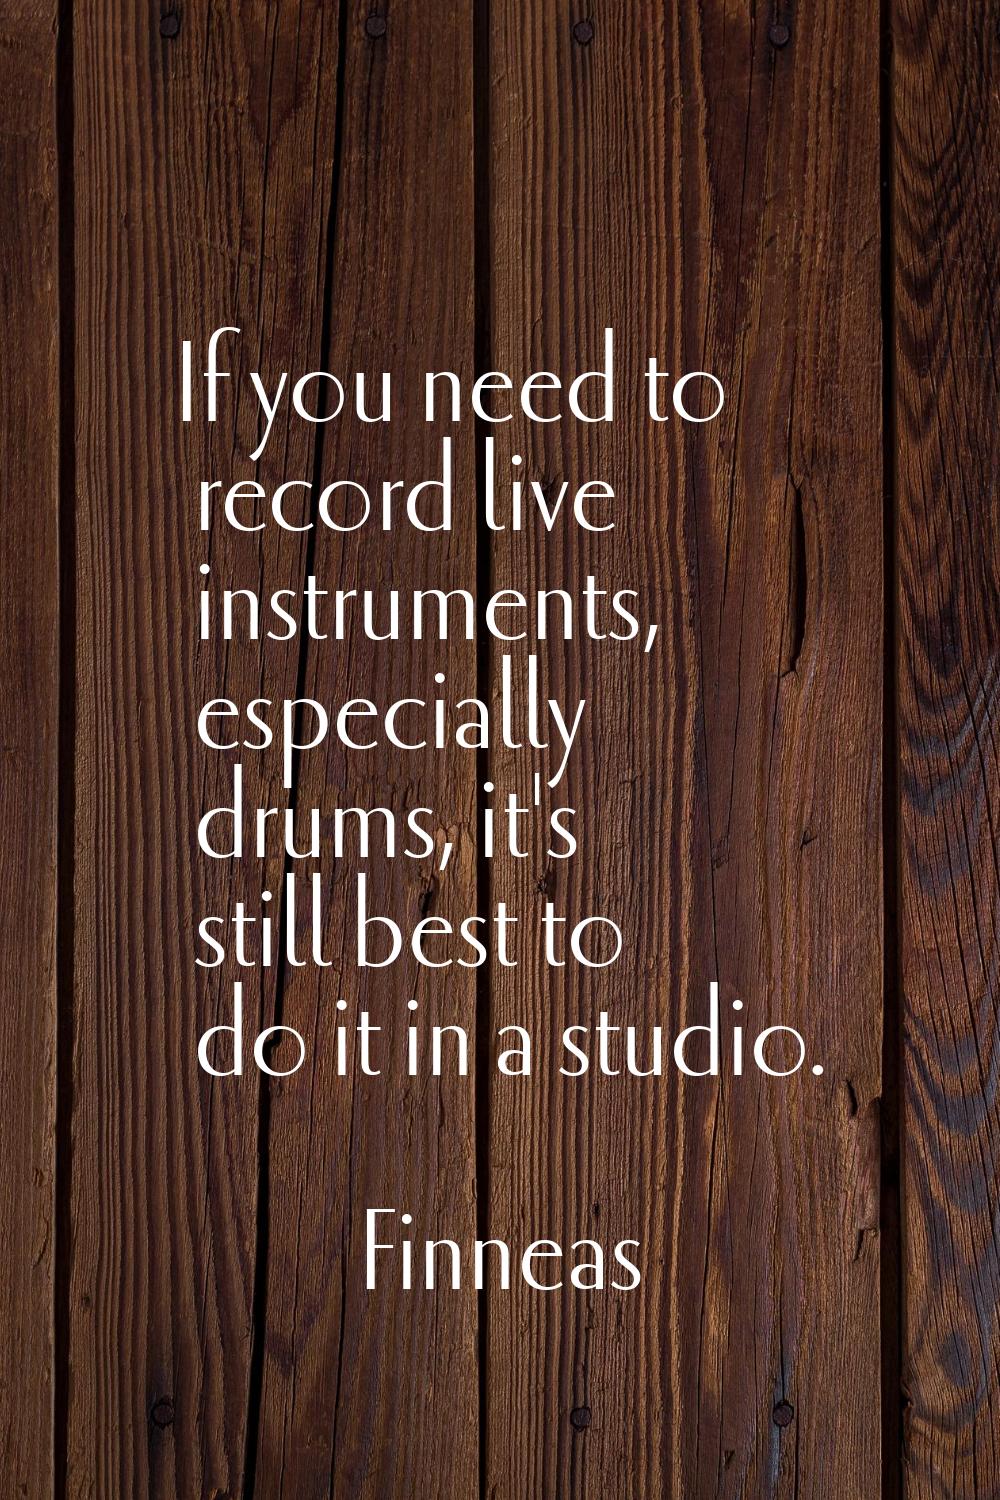 If you need to record live instruments, especially drums, it's still best to do it in a studio.